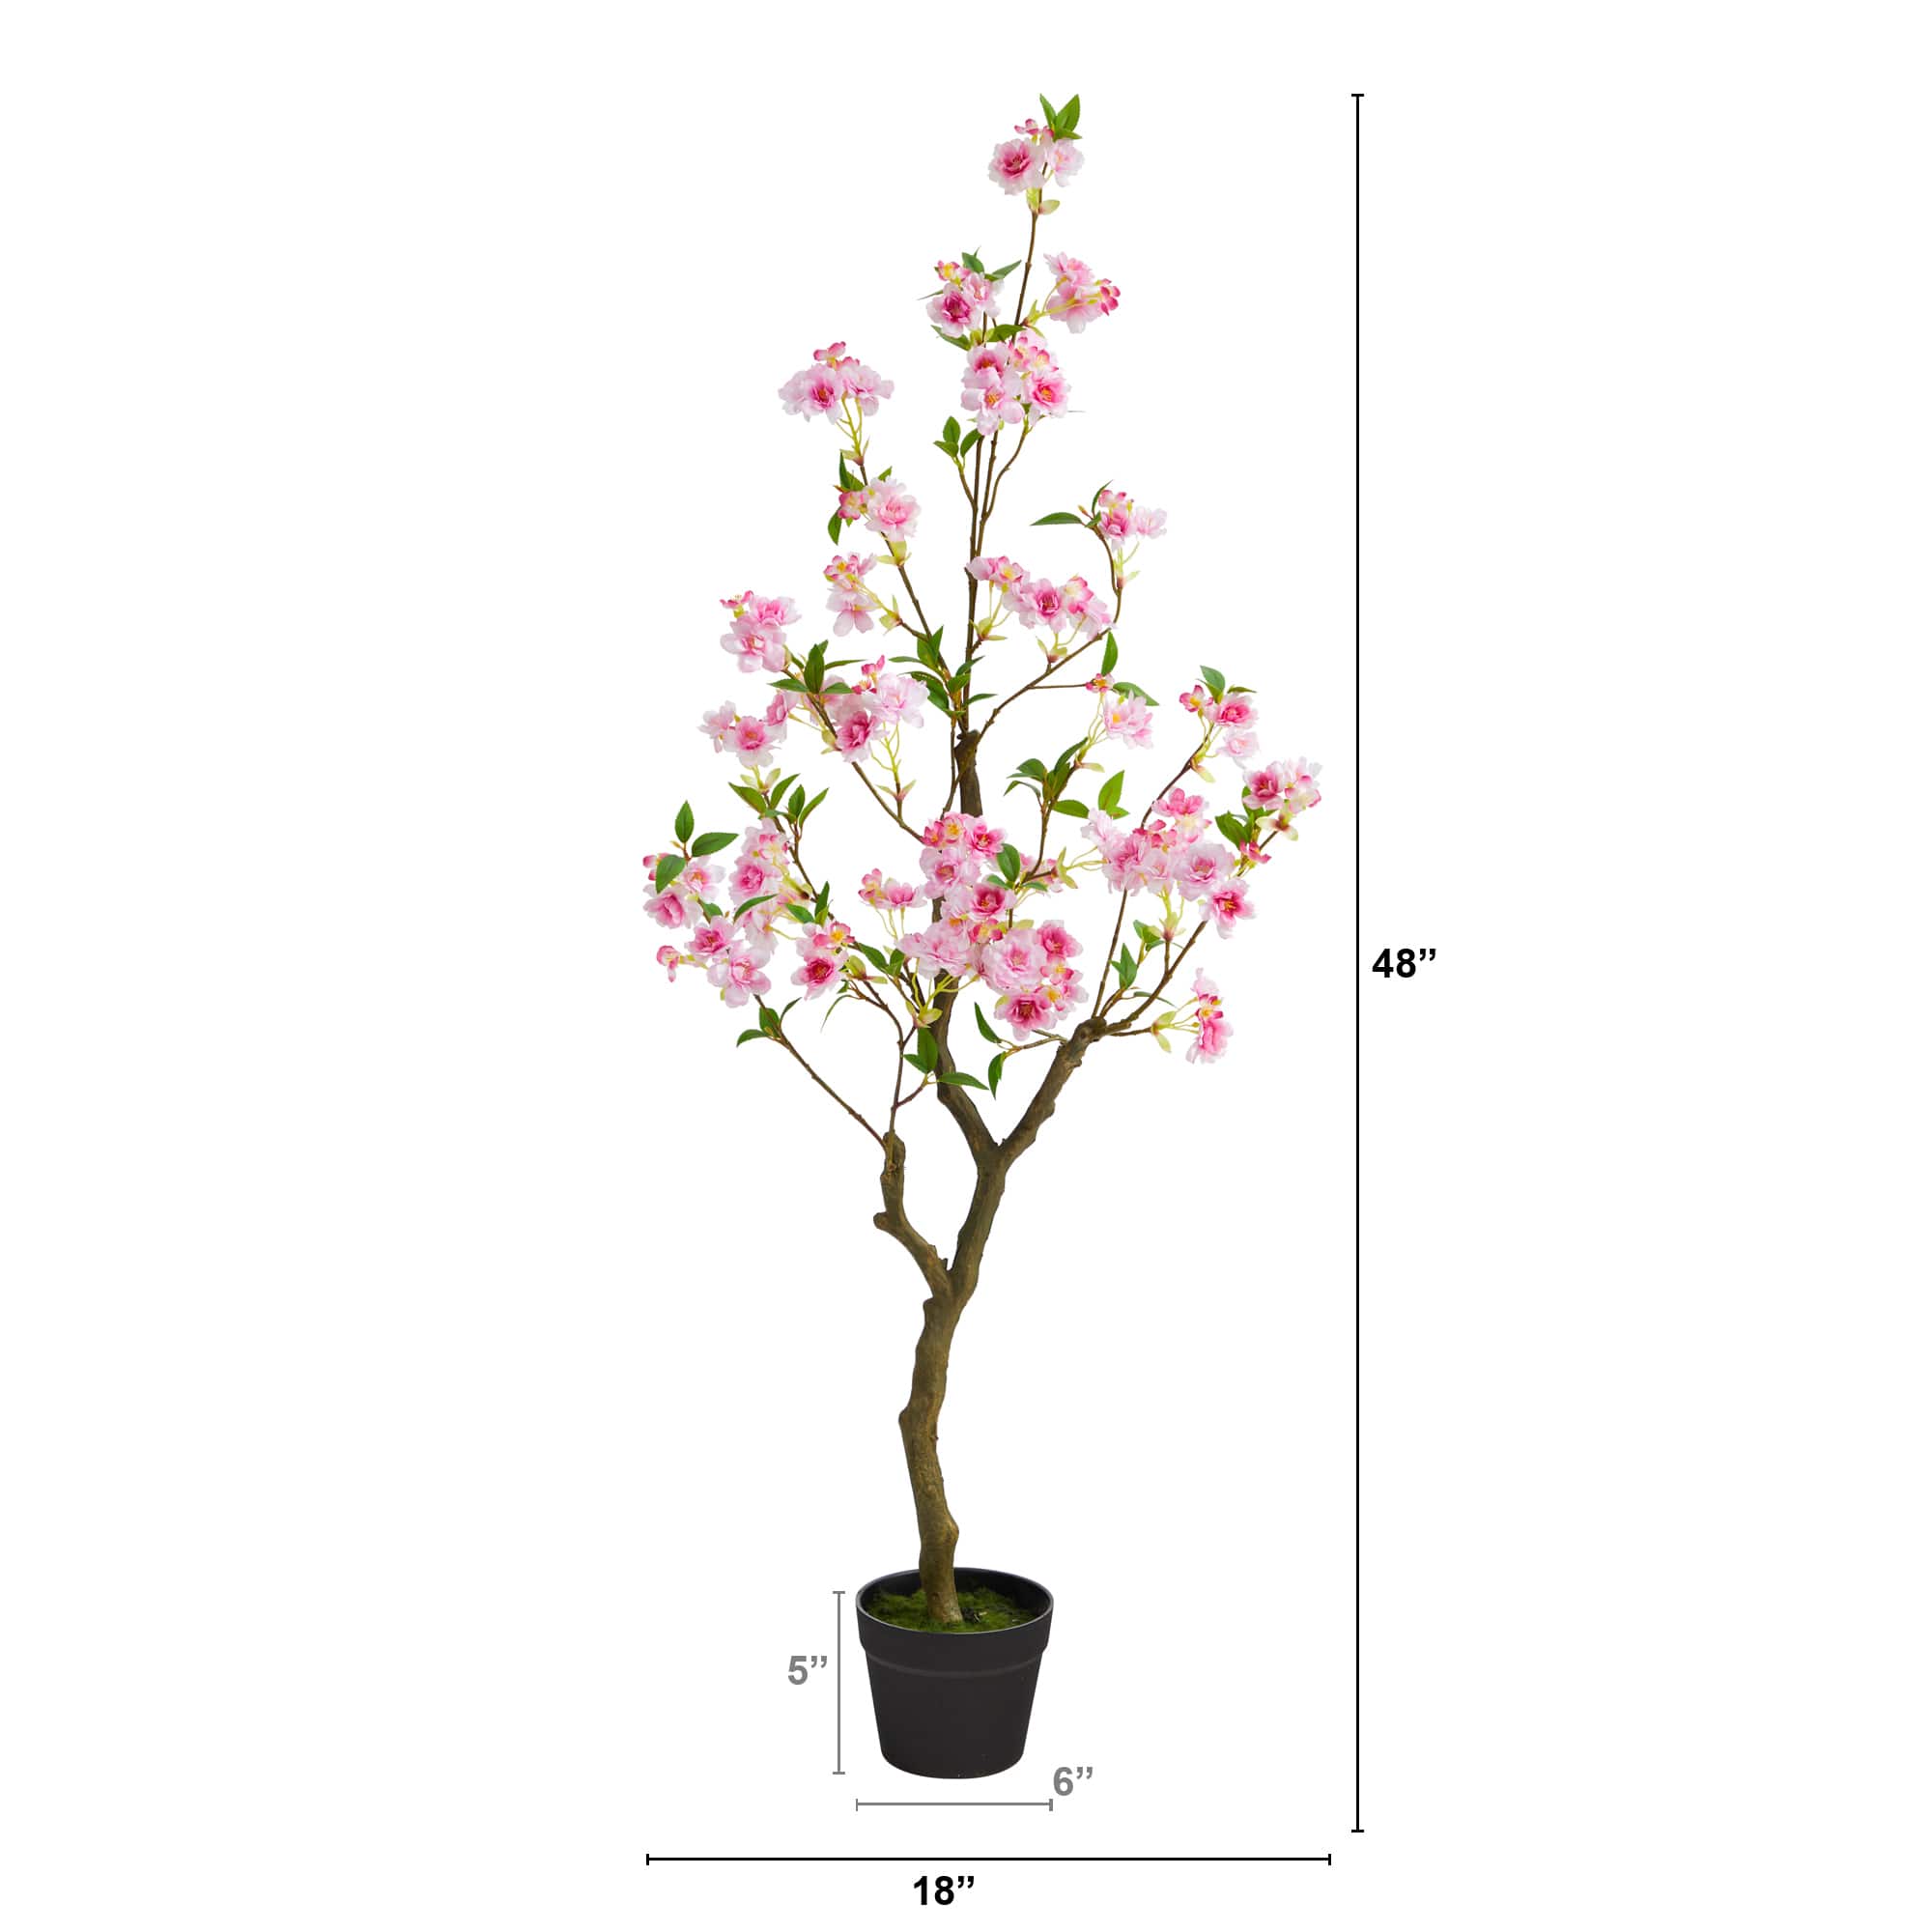 4ft. Potted Cherry Blossom